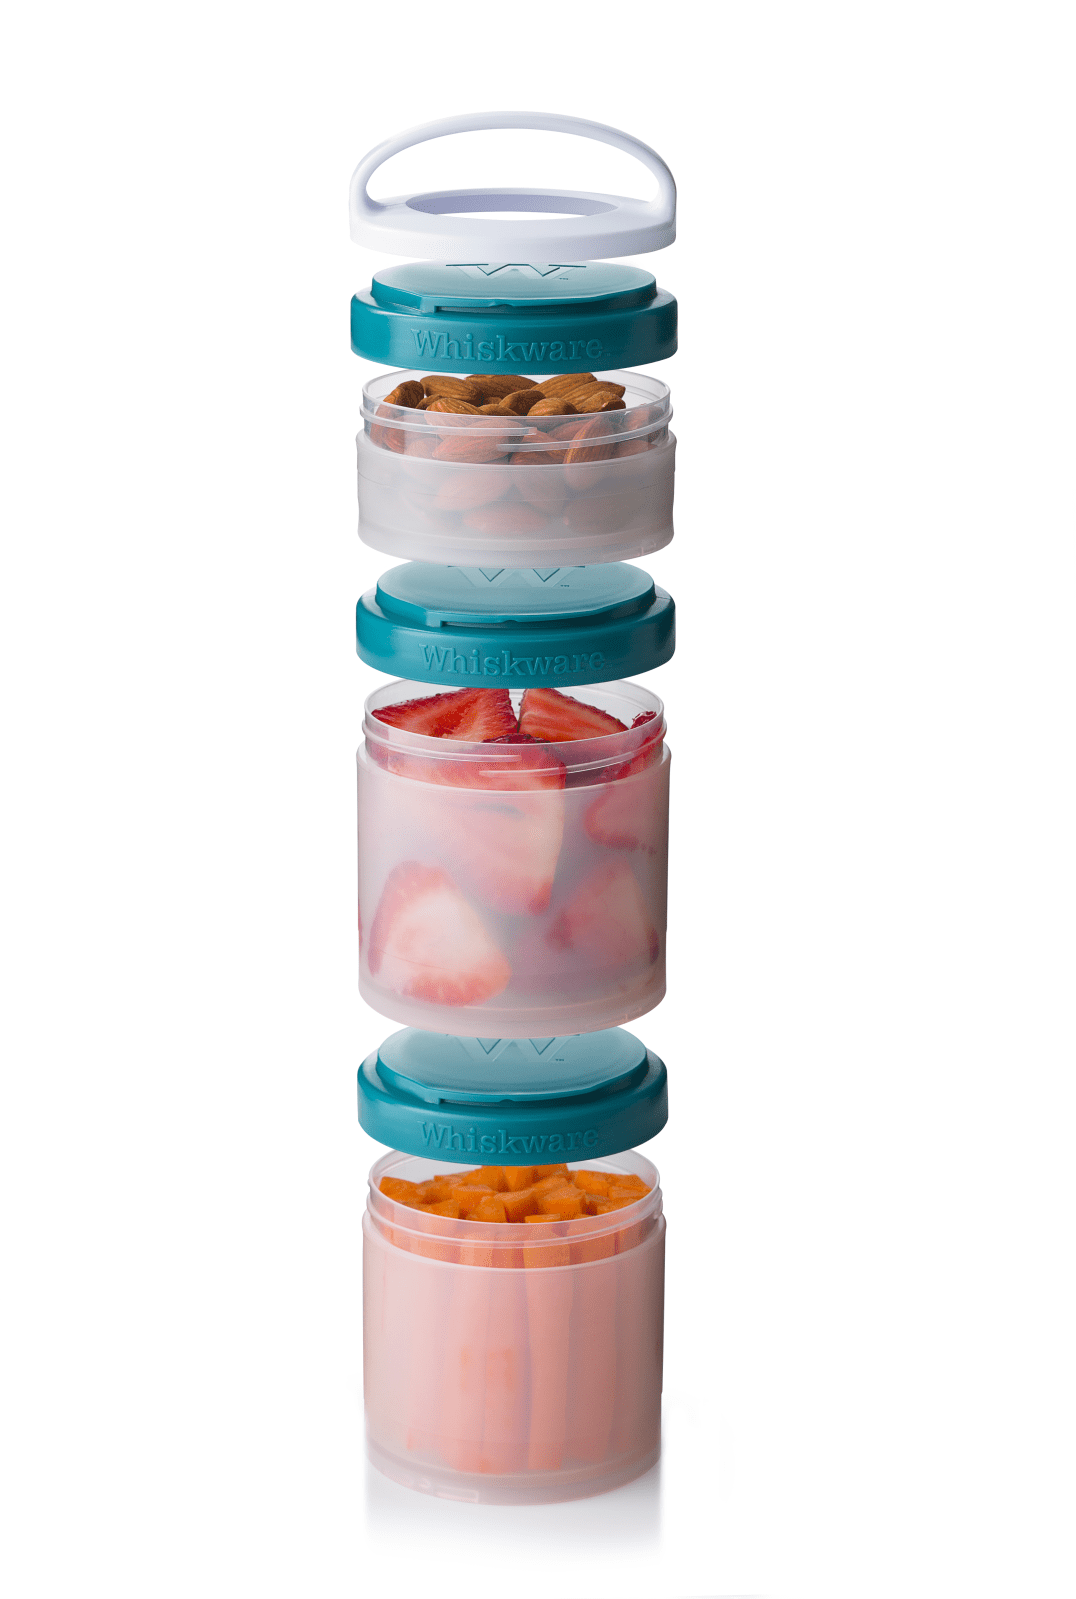 Whiskware Disney Frozen Stackable Snack Pack, 2 1/3 cups, Anna and